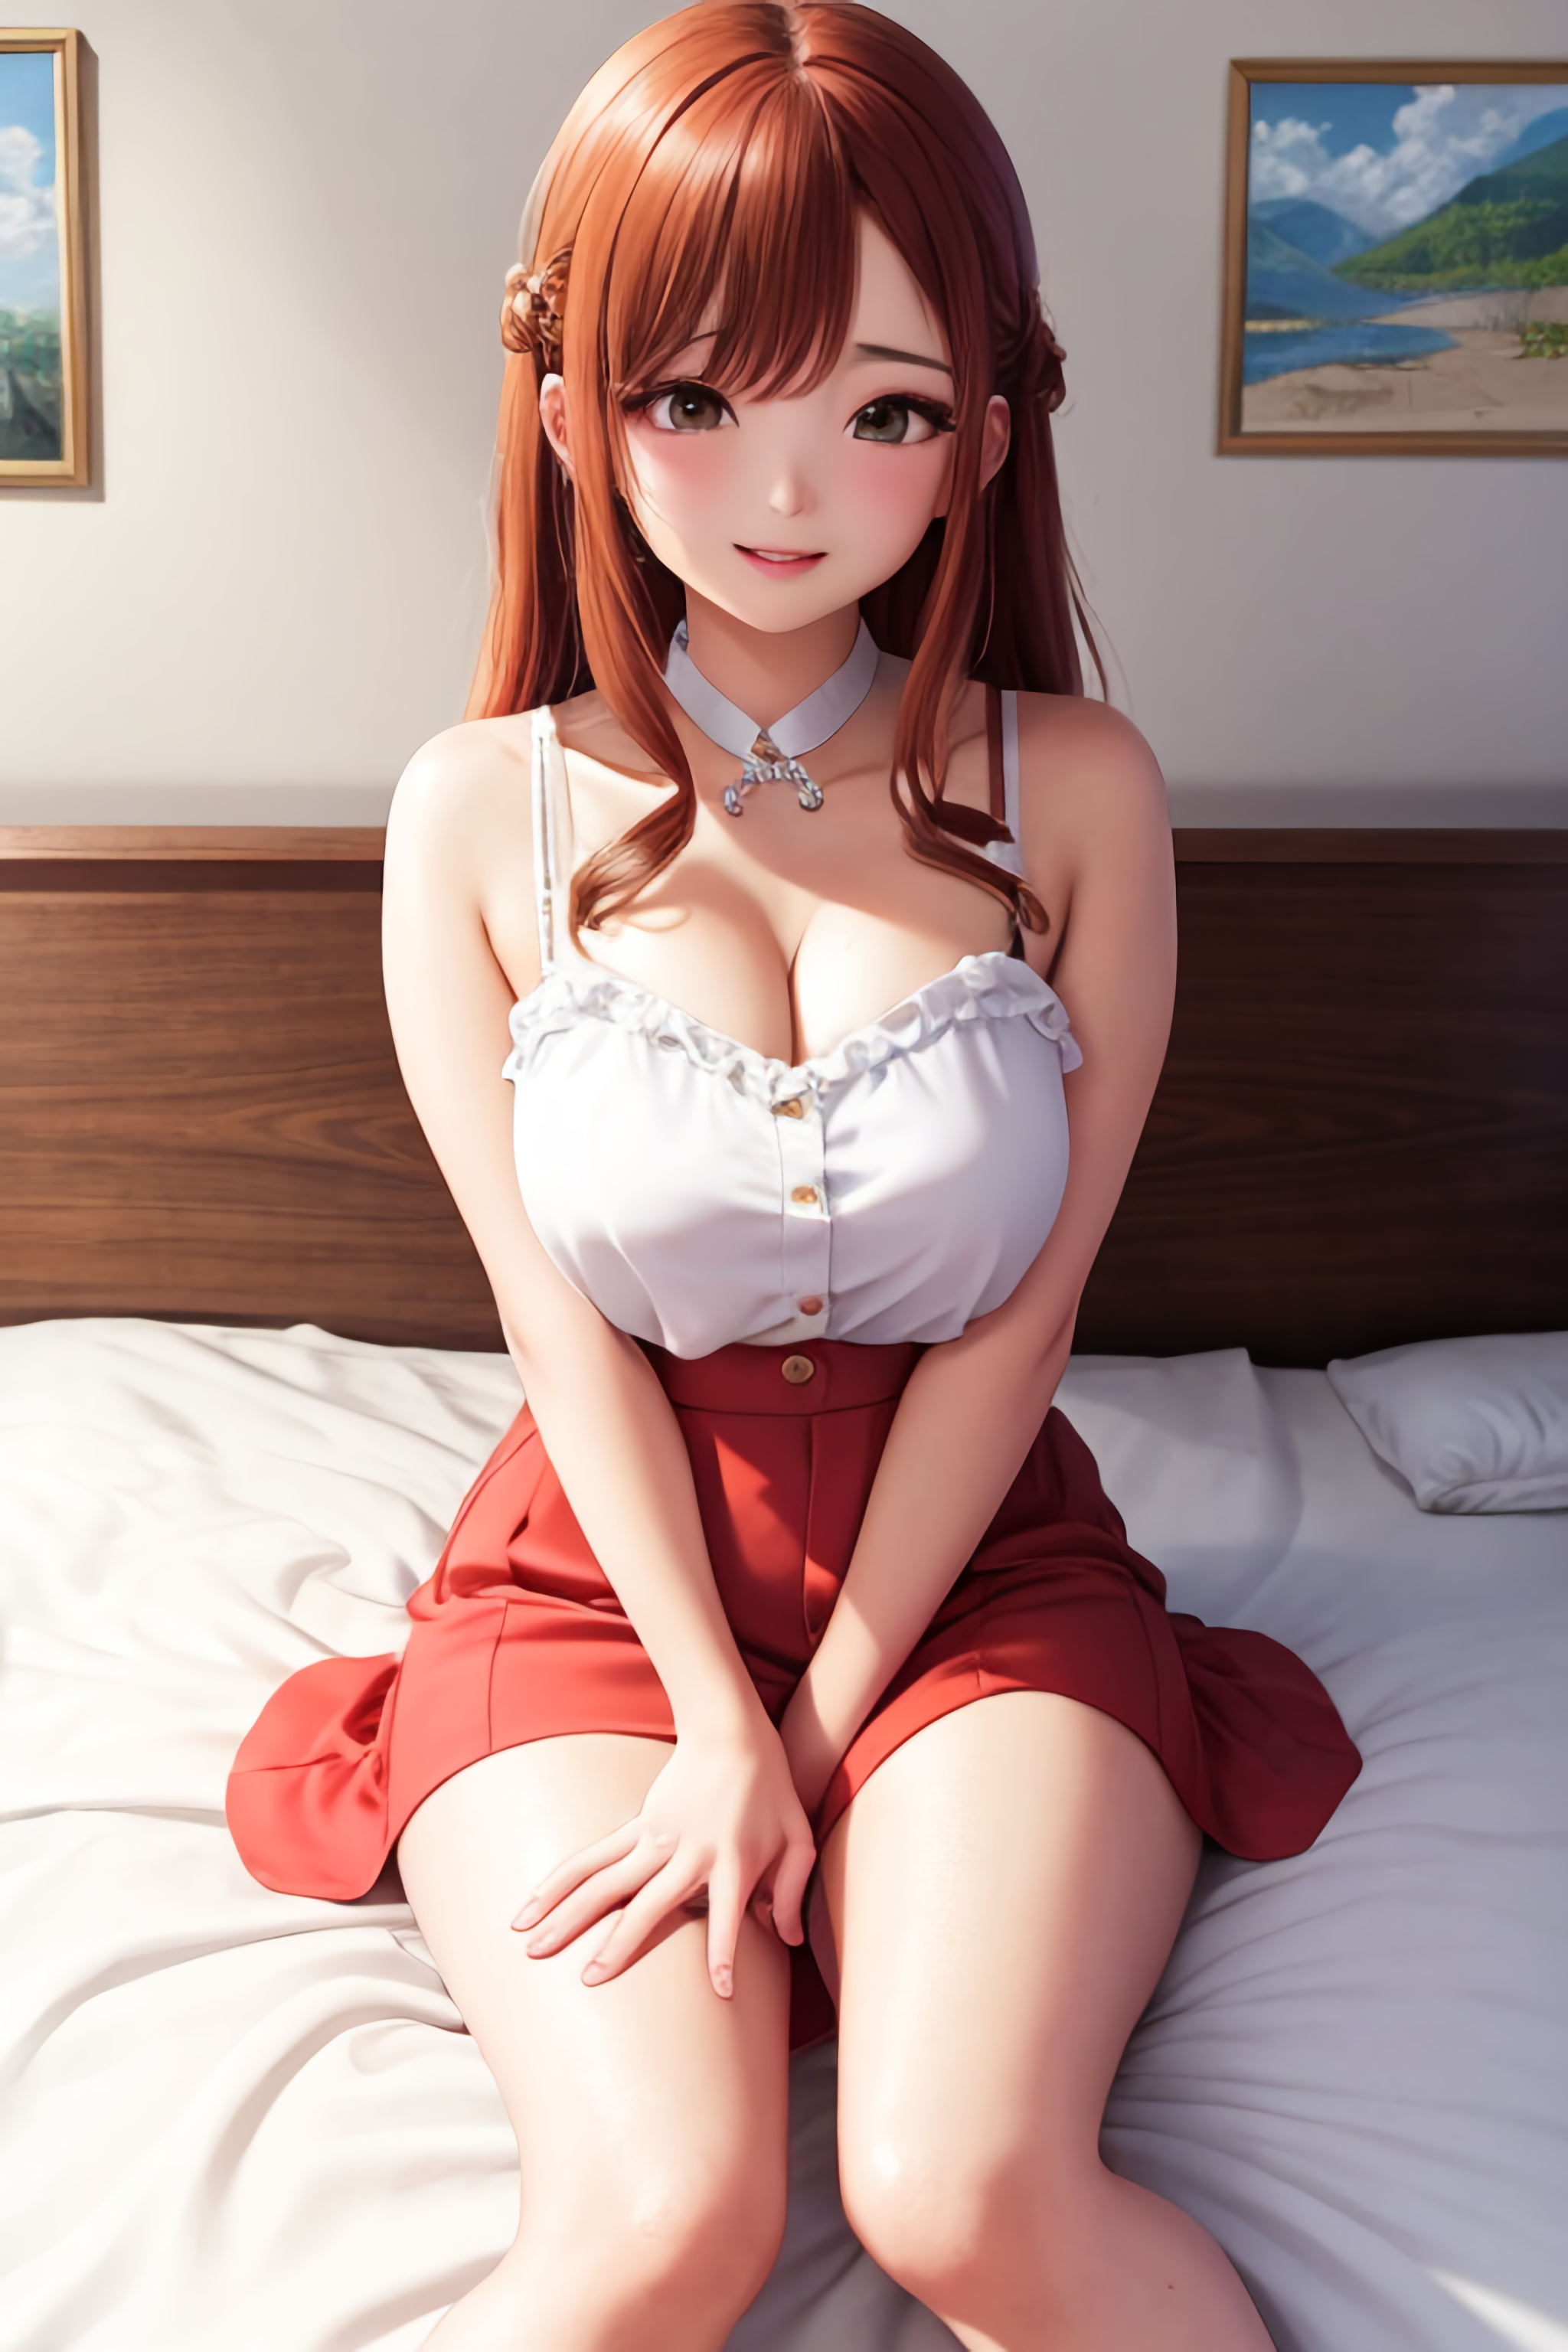 Japan Anime Girls Vertical Looking At Viewer Redhead Smiling Pillow Bed Ai Art 2048x3072